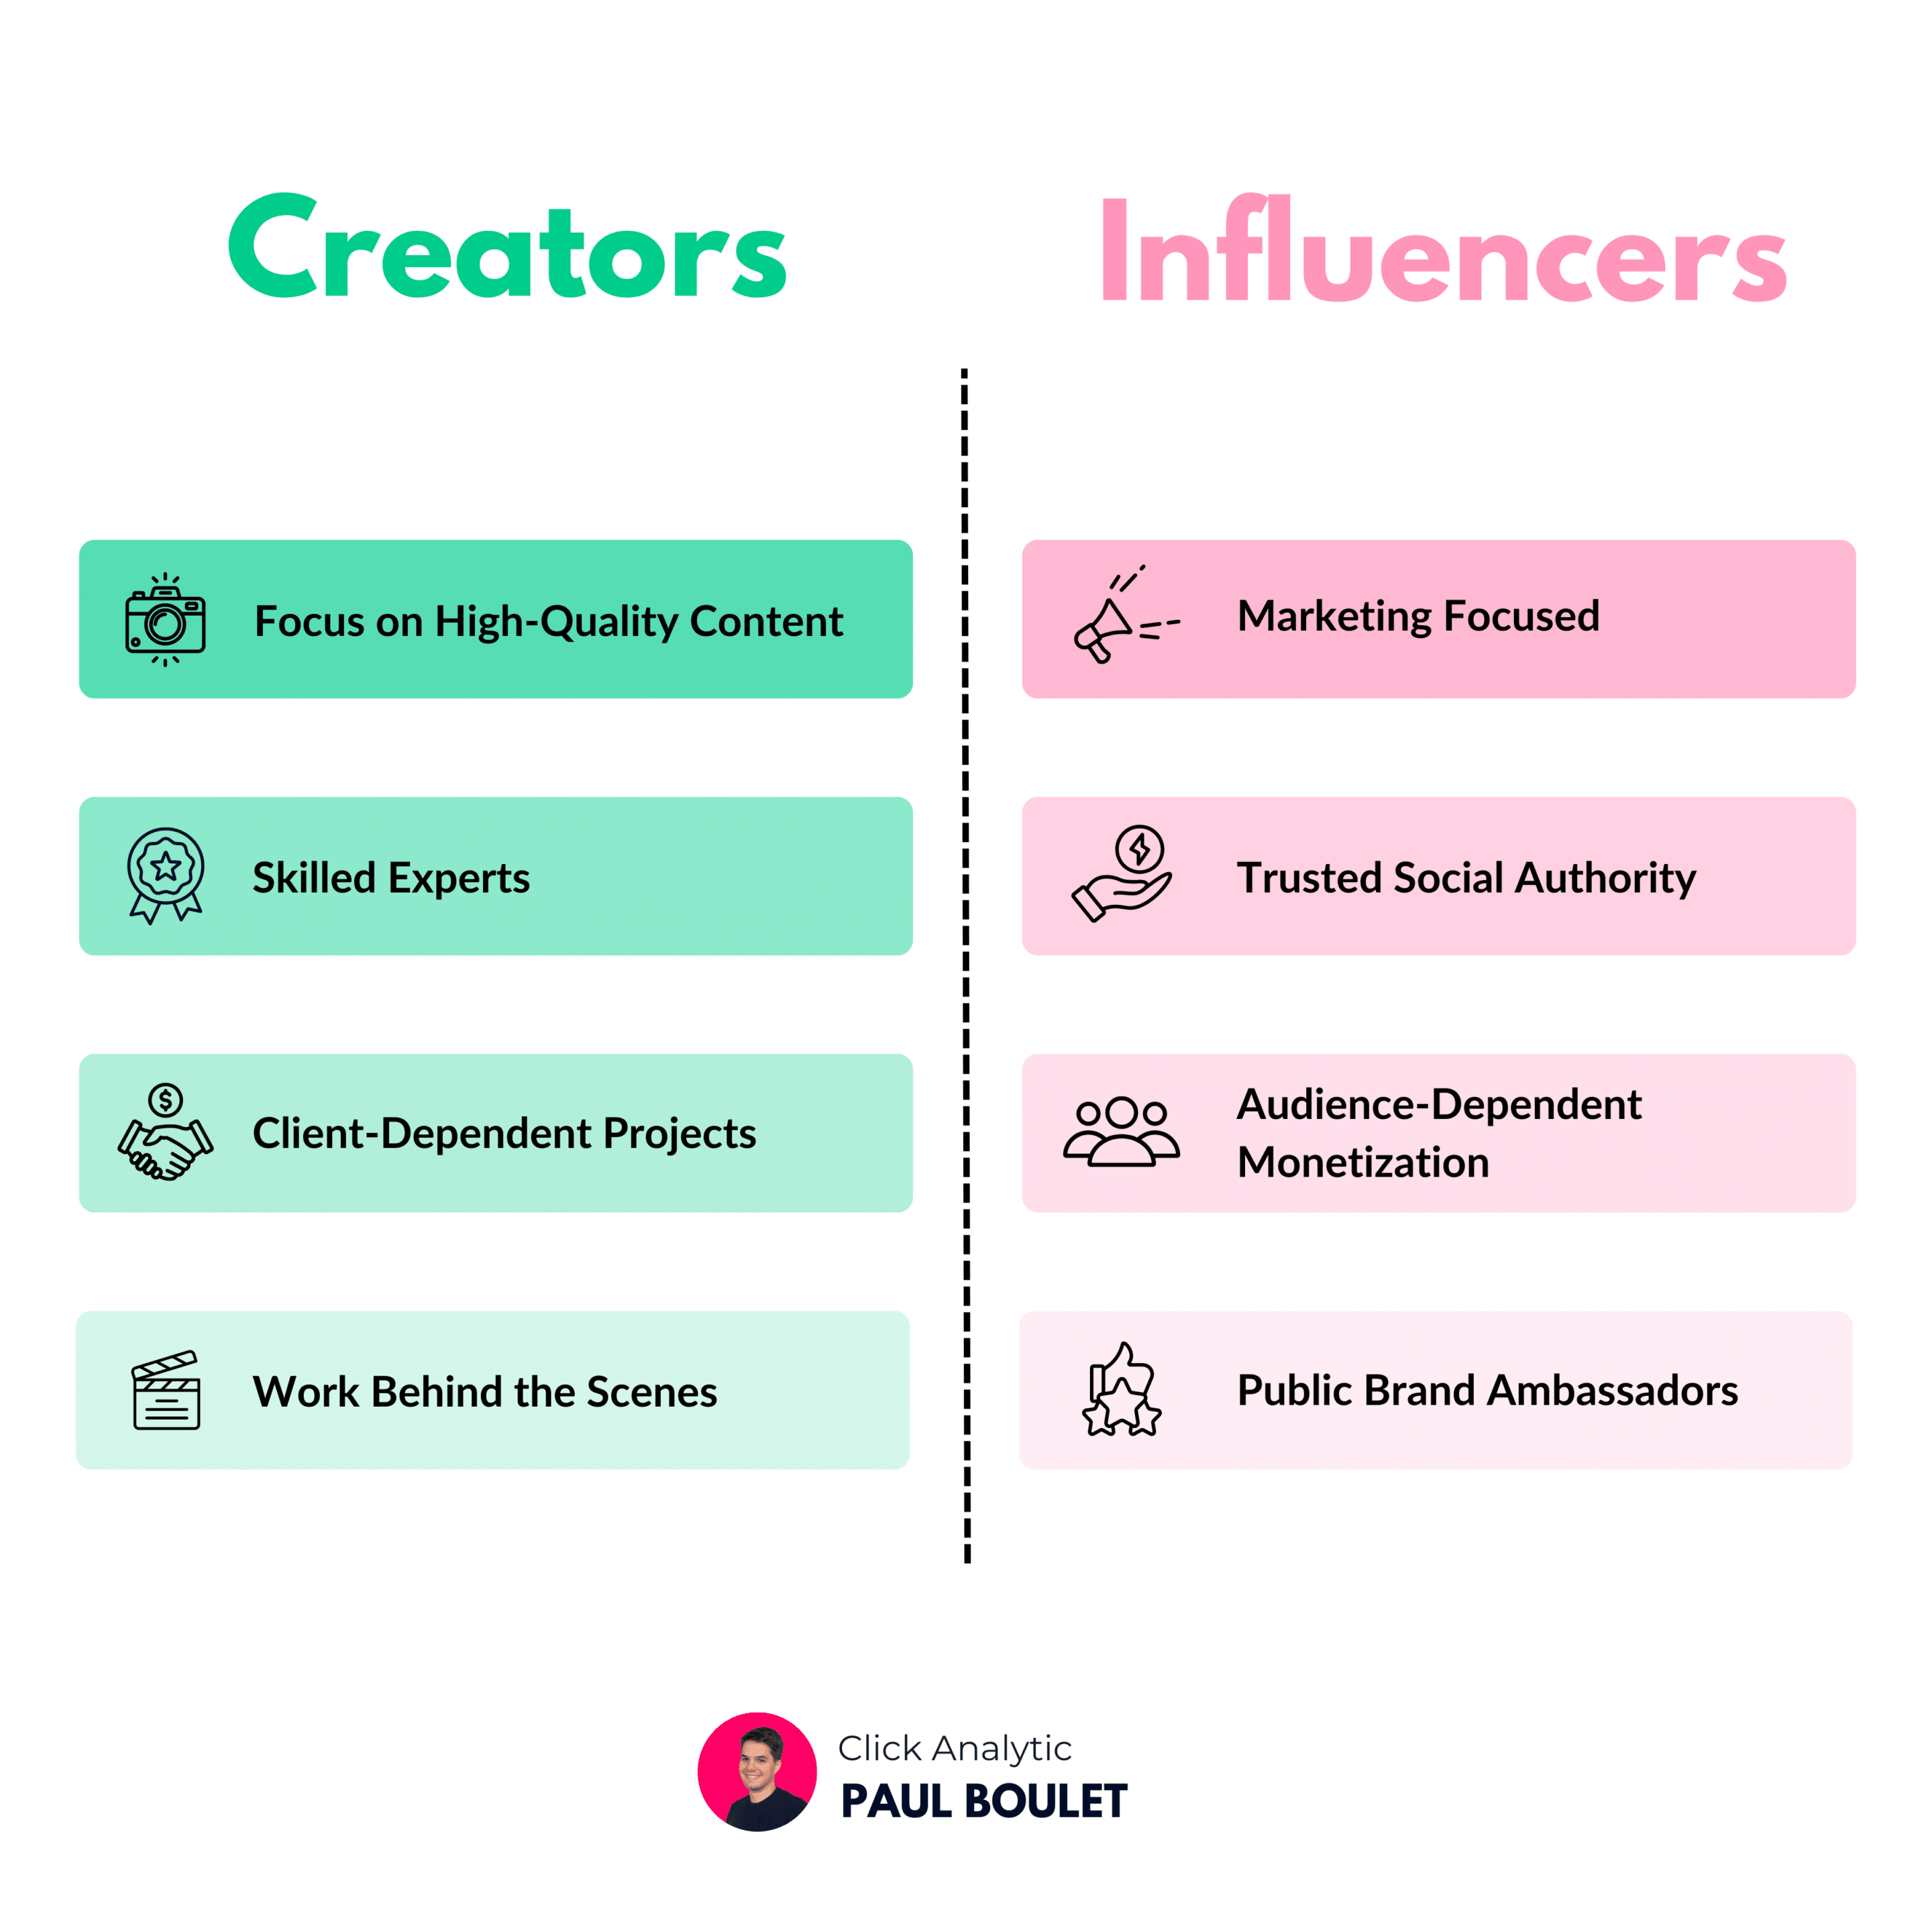 A comparison chart titled "Creators vs. Influencers" listing traits: Creators focus on high-quality content, are skilled experts, work on client-dependent projects, and behind the scenes. Influencers are marketing-focused, trusted social authorities, audience-dependent for monetization, and public brand ambassadors.